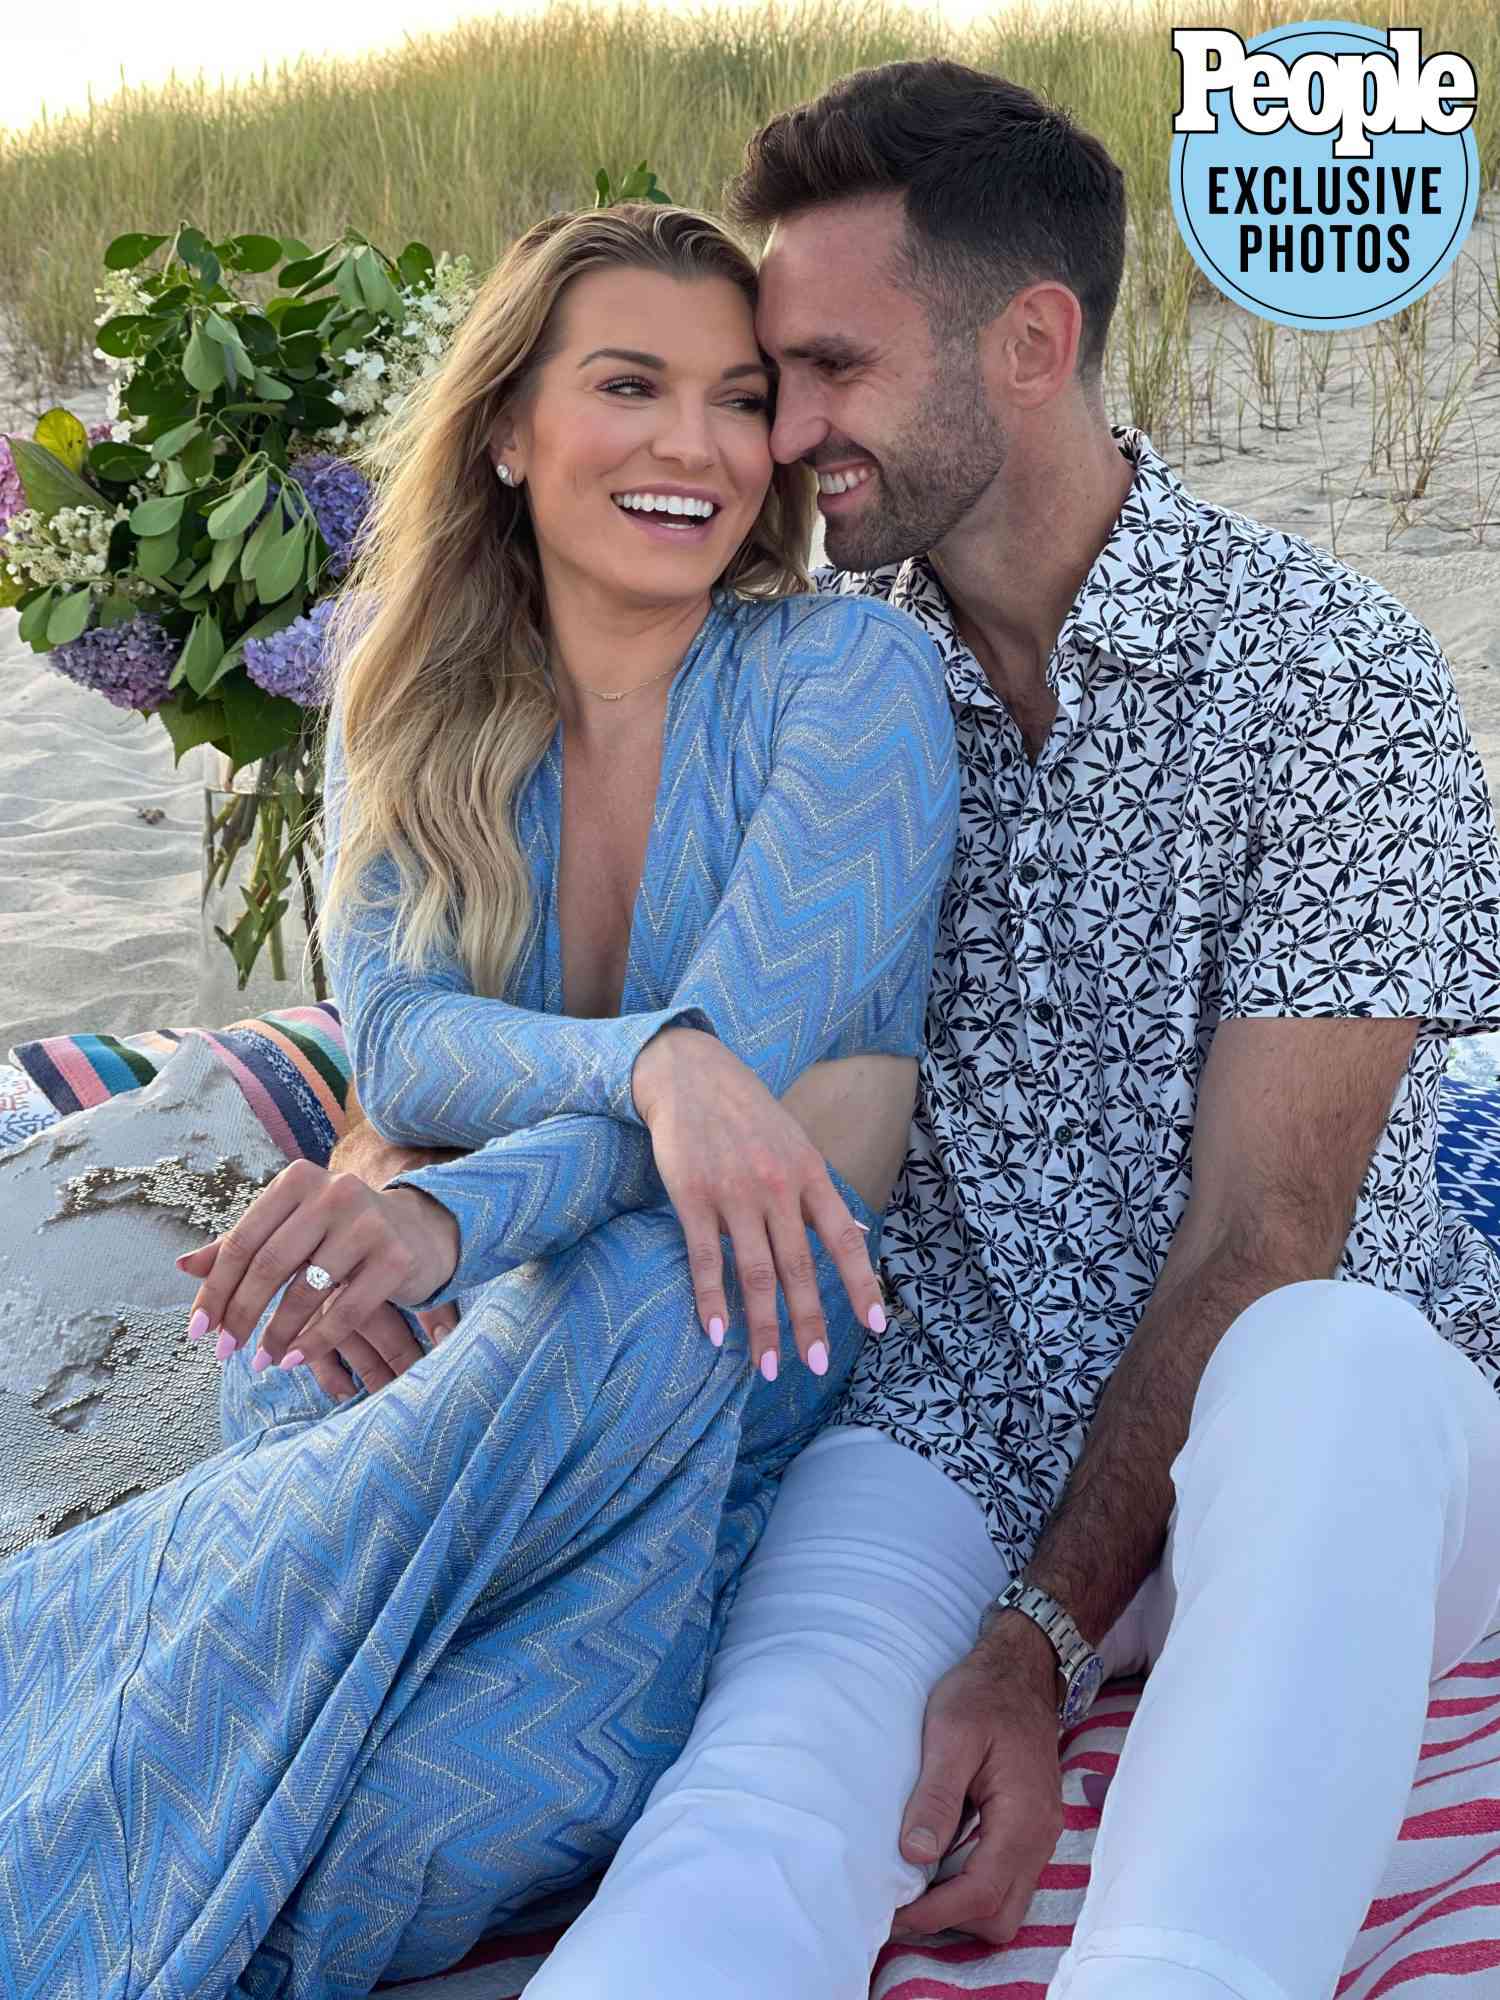 Summer House Stars Lindsay Hubbard and Carl Radke Are Engaged After Romantic Beachside Proposal â See Her Ring. Phot credit: Adam Szulewski Olga Lezhepekova